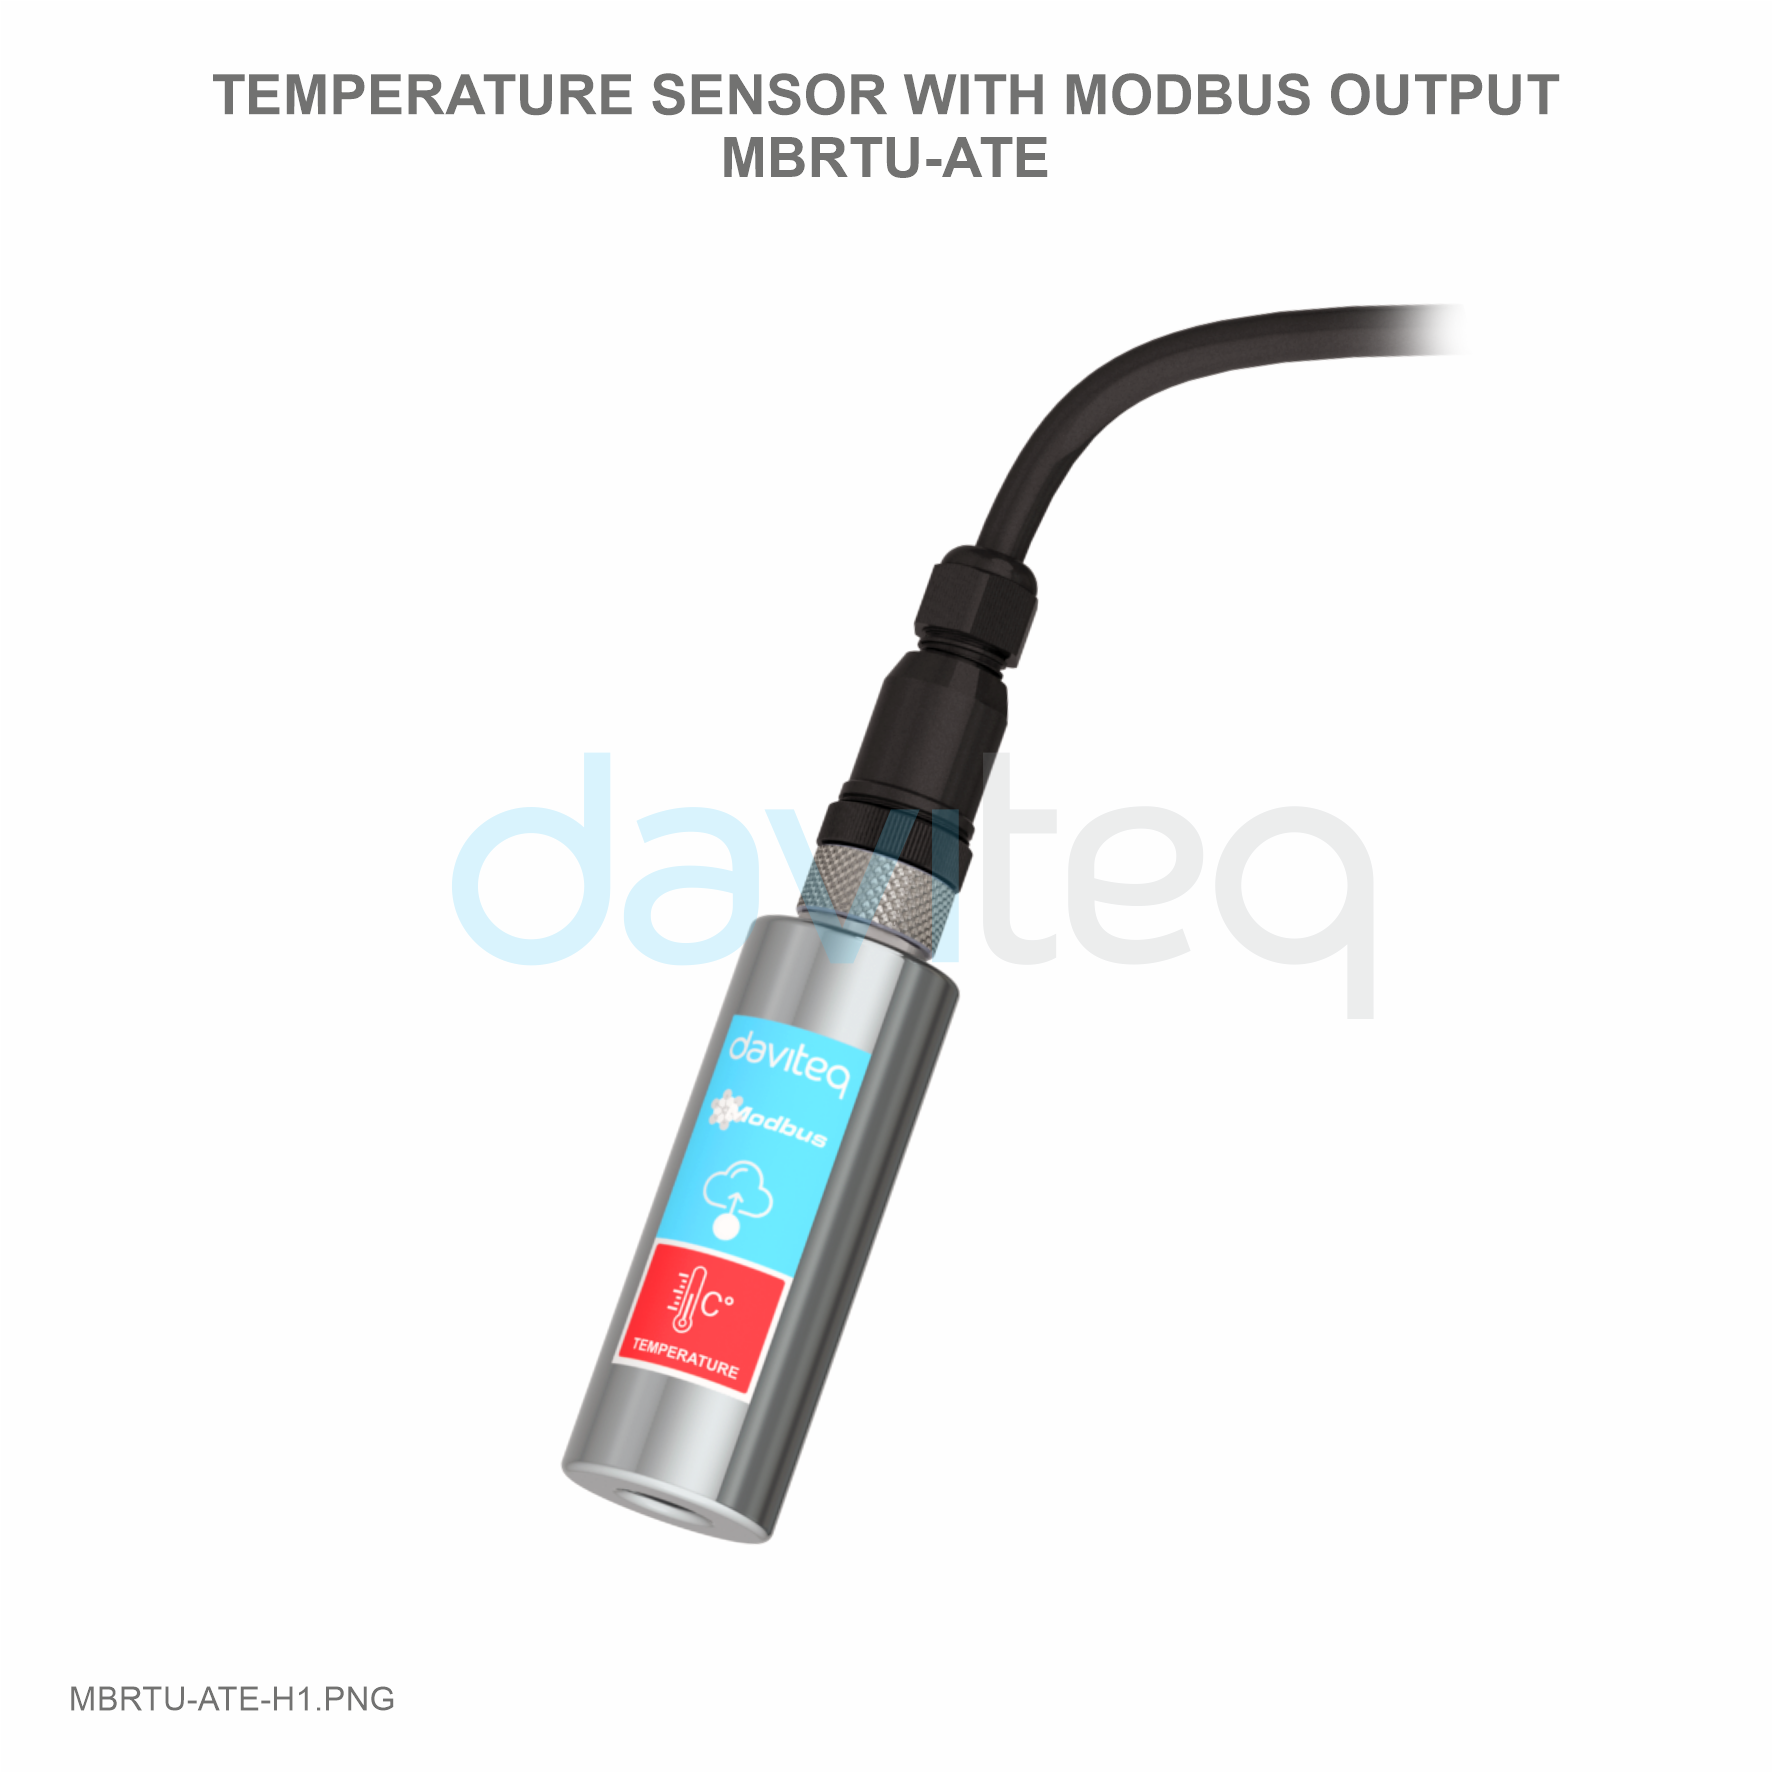 Temperature sensor with Modbus output MBRTU-ATE-H1.png